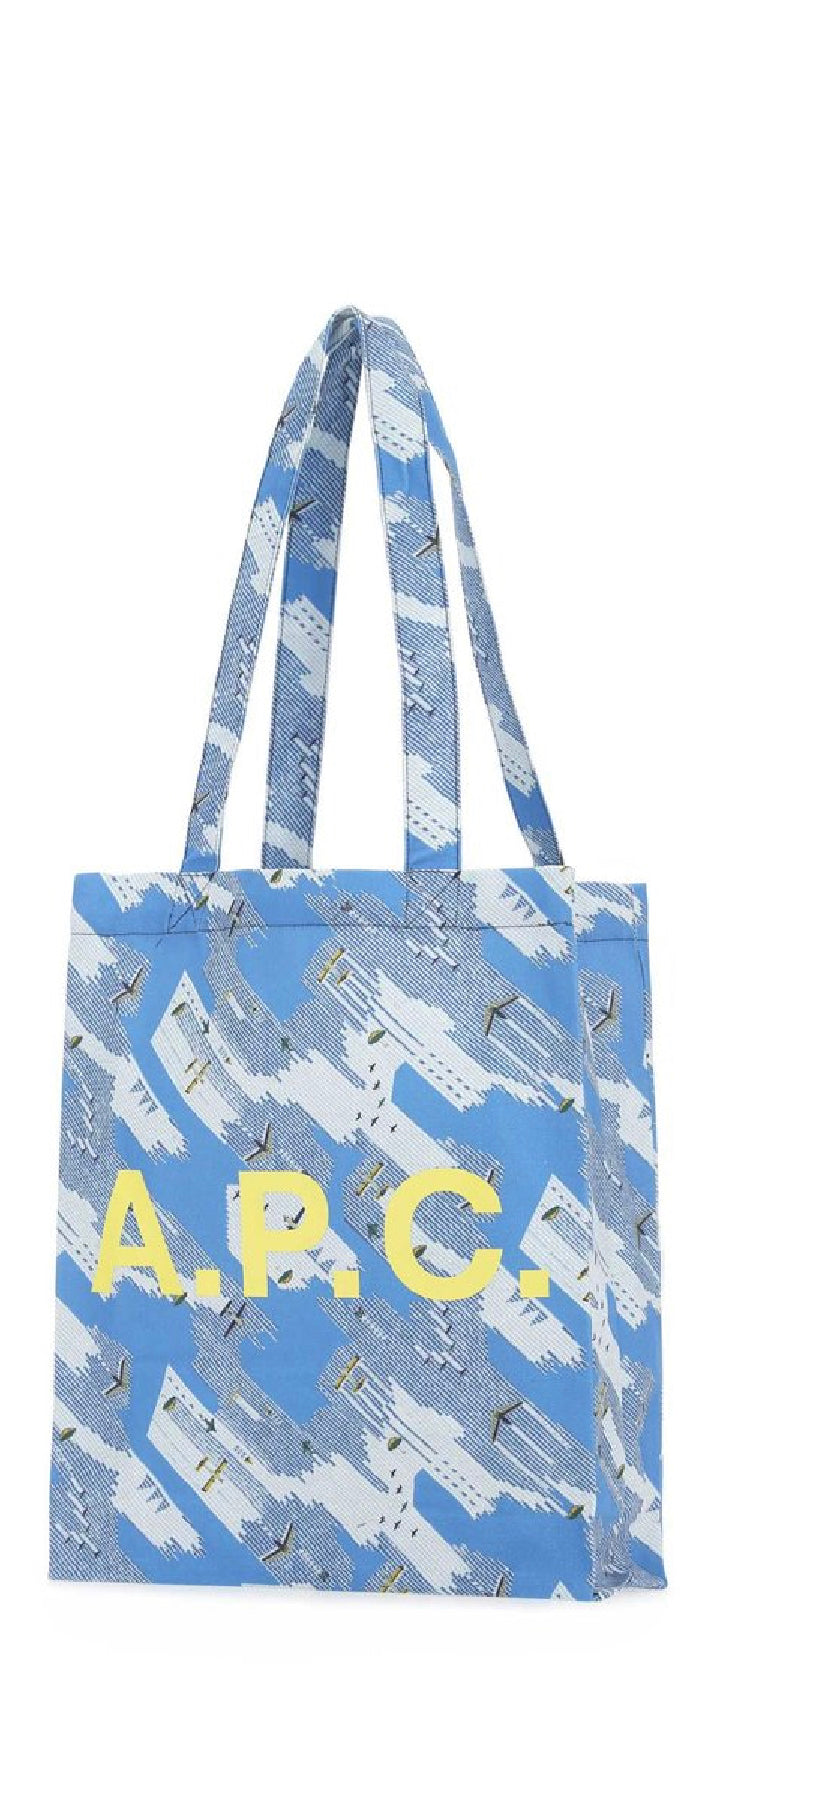 All-Over Printed Tote